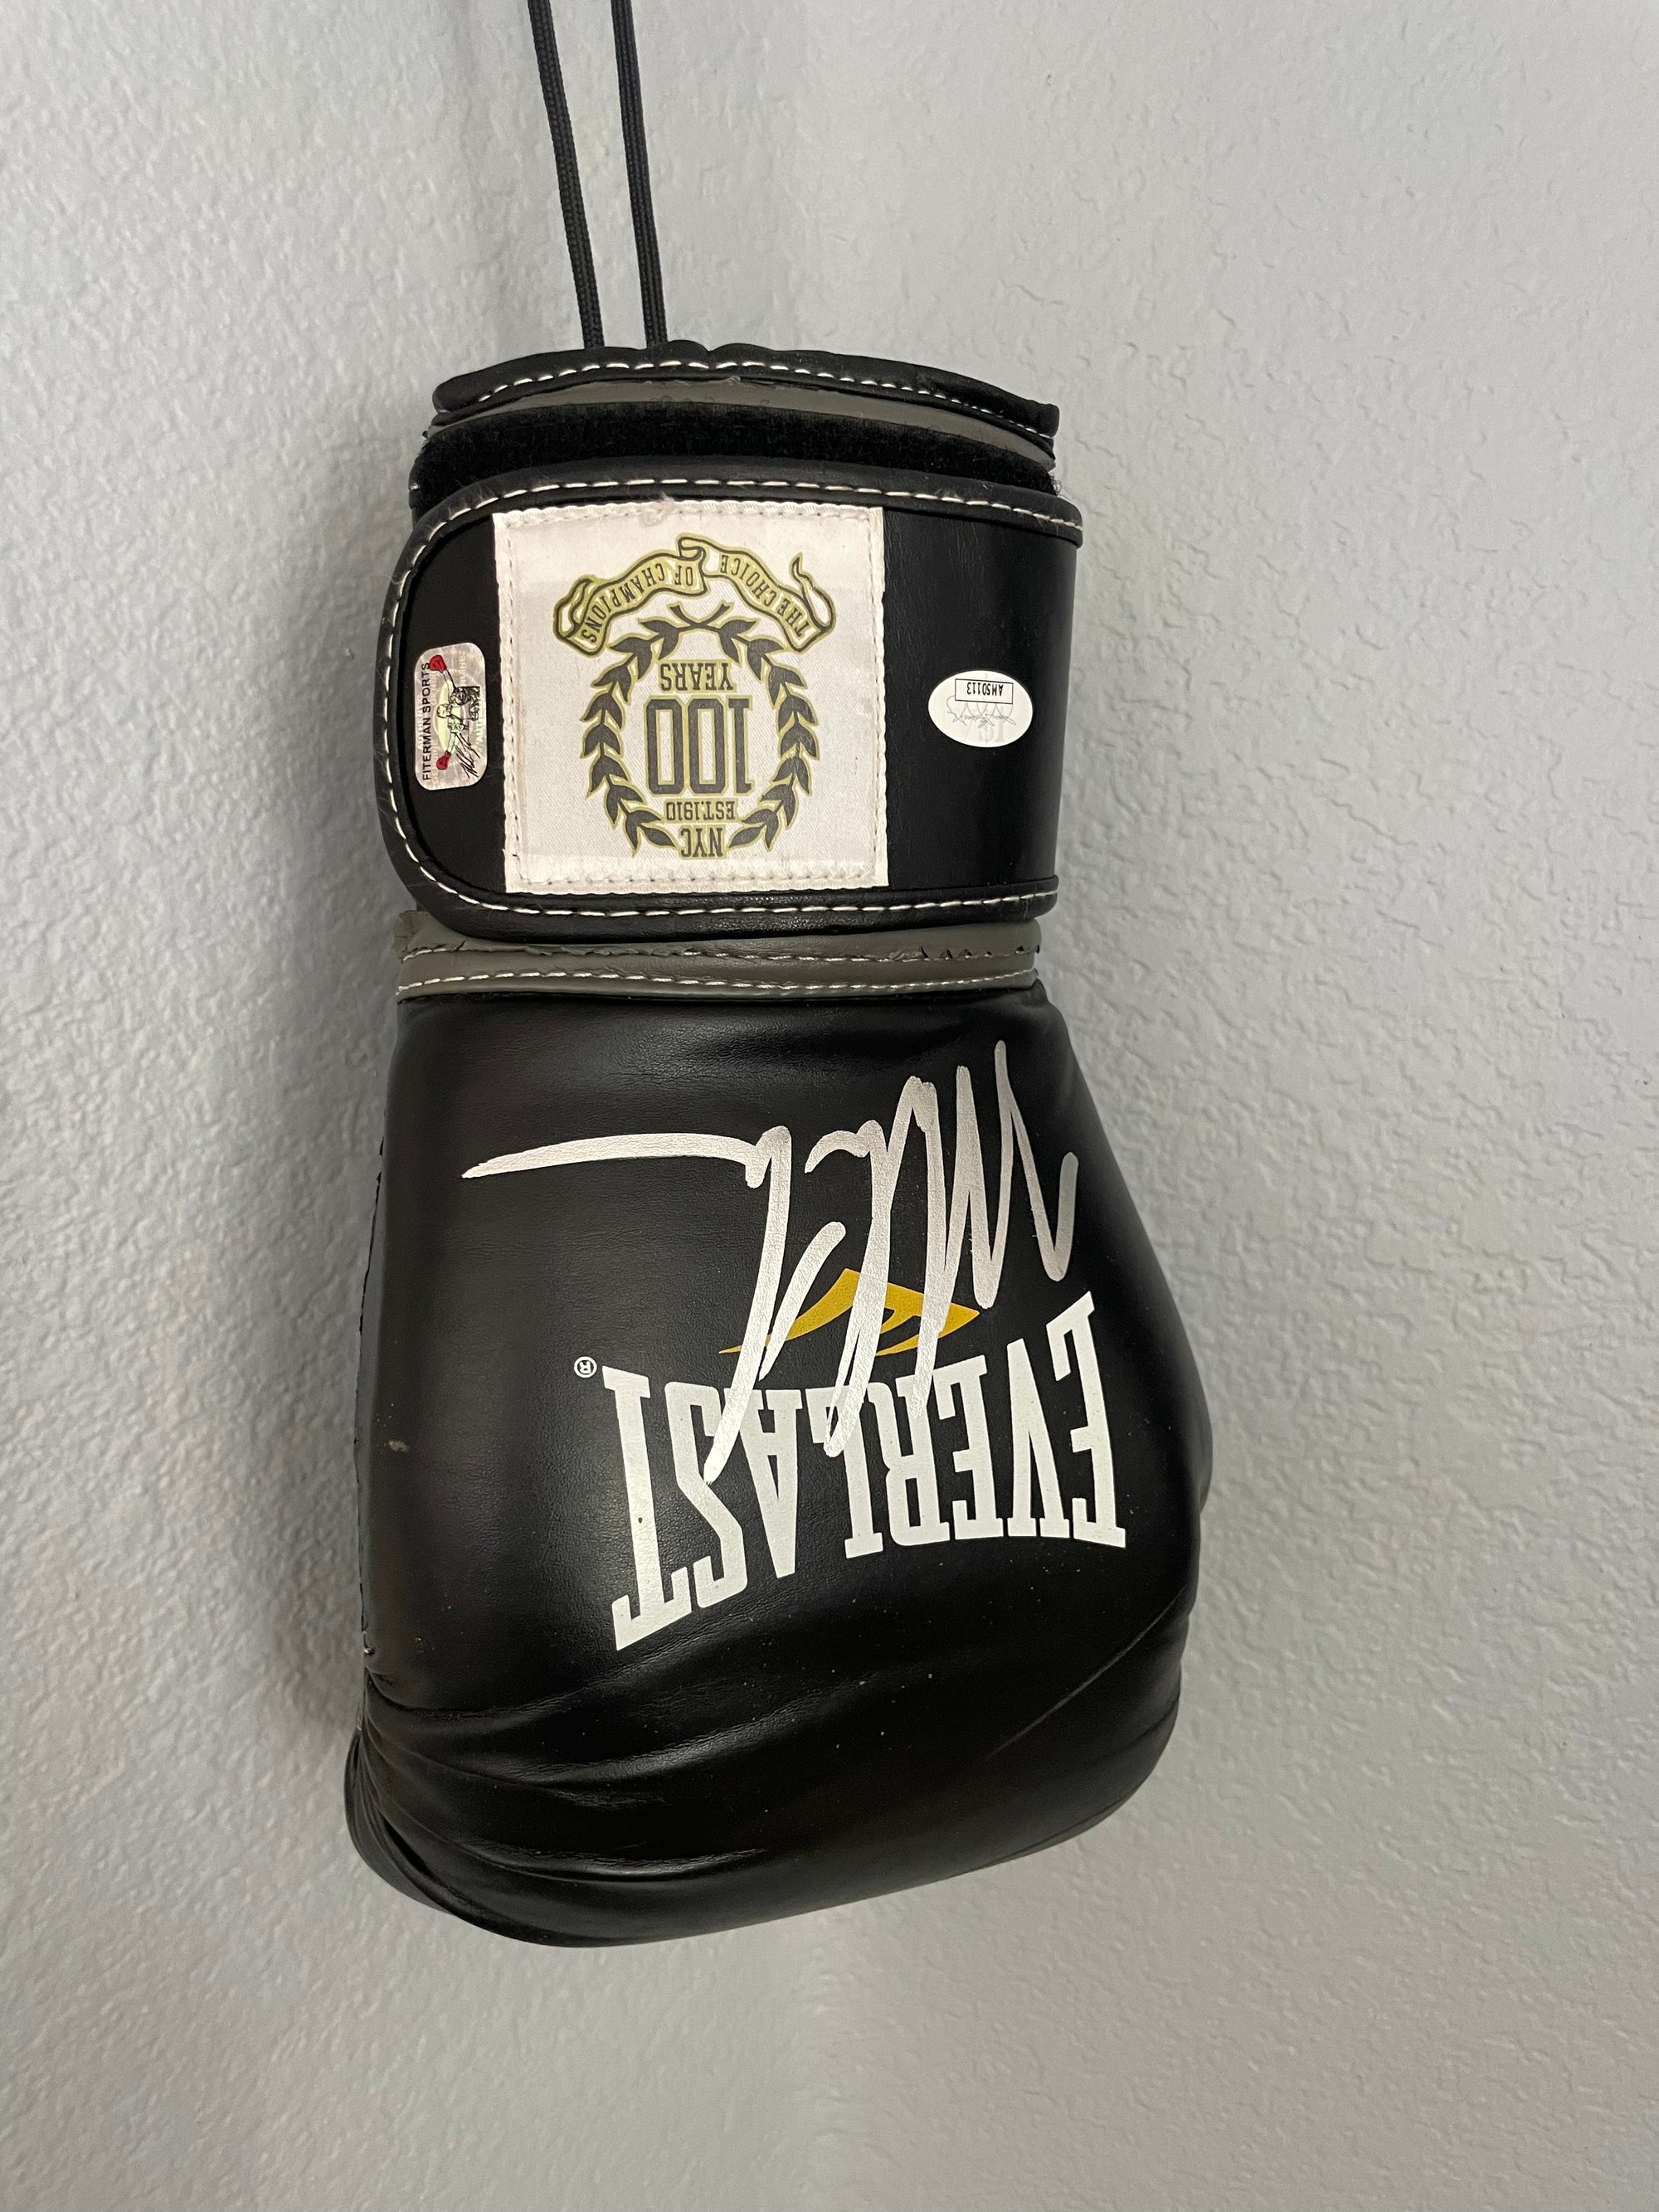 Mike Tyson Signed Everlast 100 Year Anniversary Limited Edition Boxing Glove (JSA & Tyson)